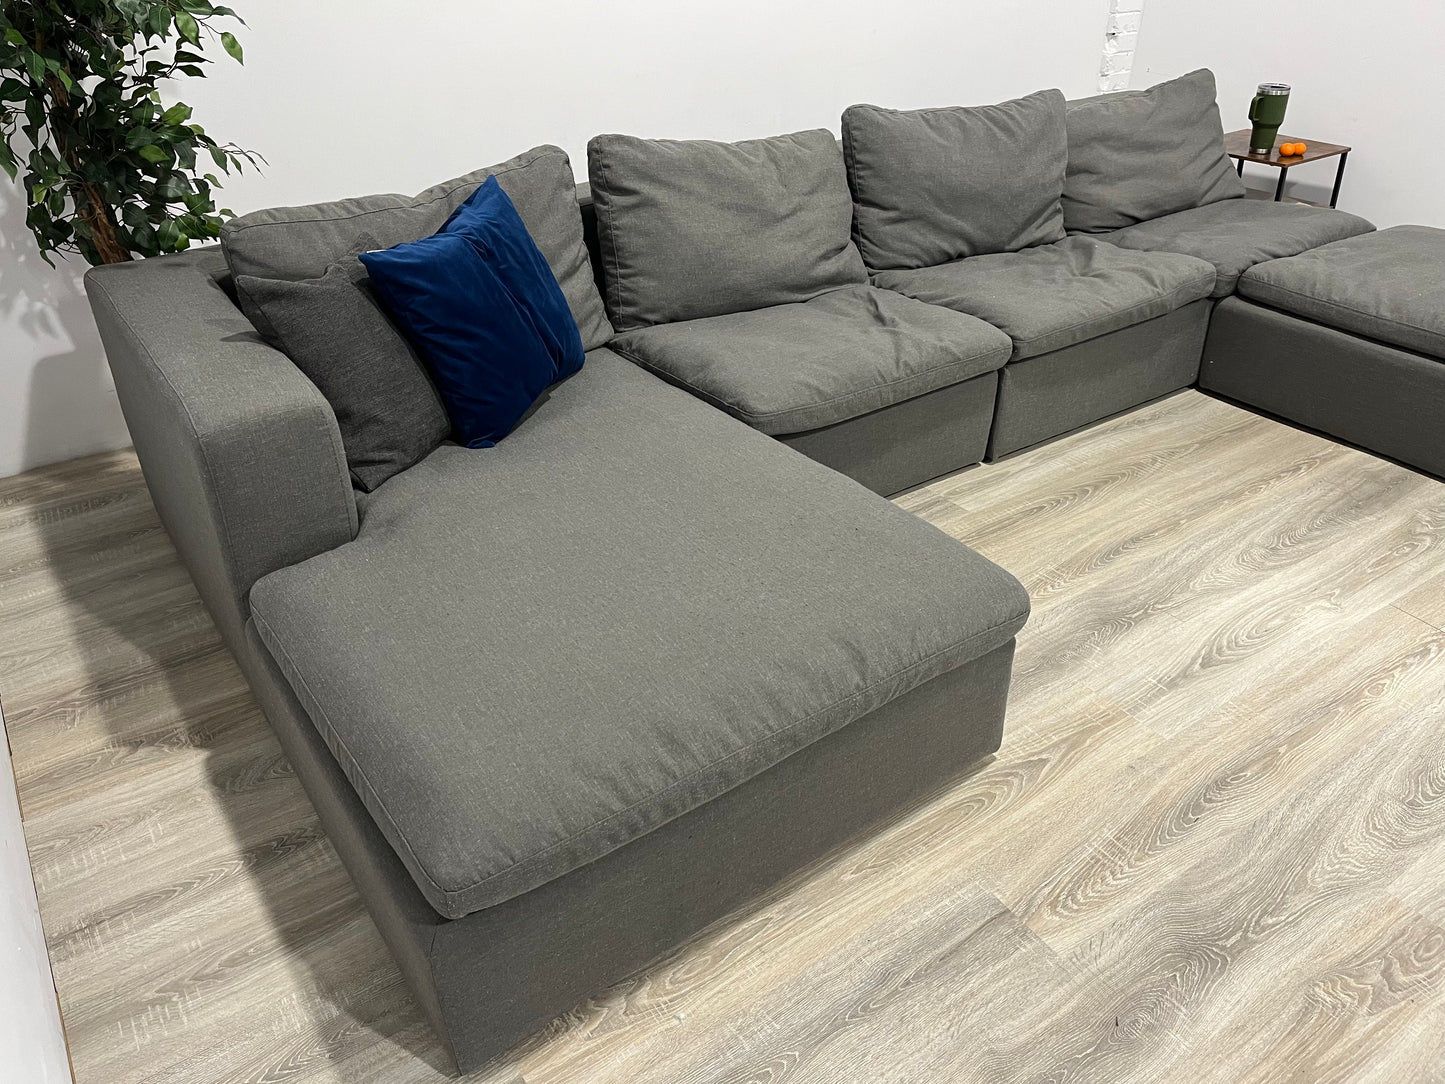 Modular 4-Piece Sectional Couch